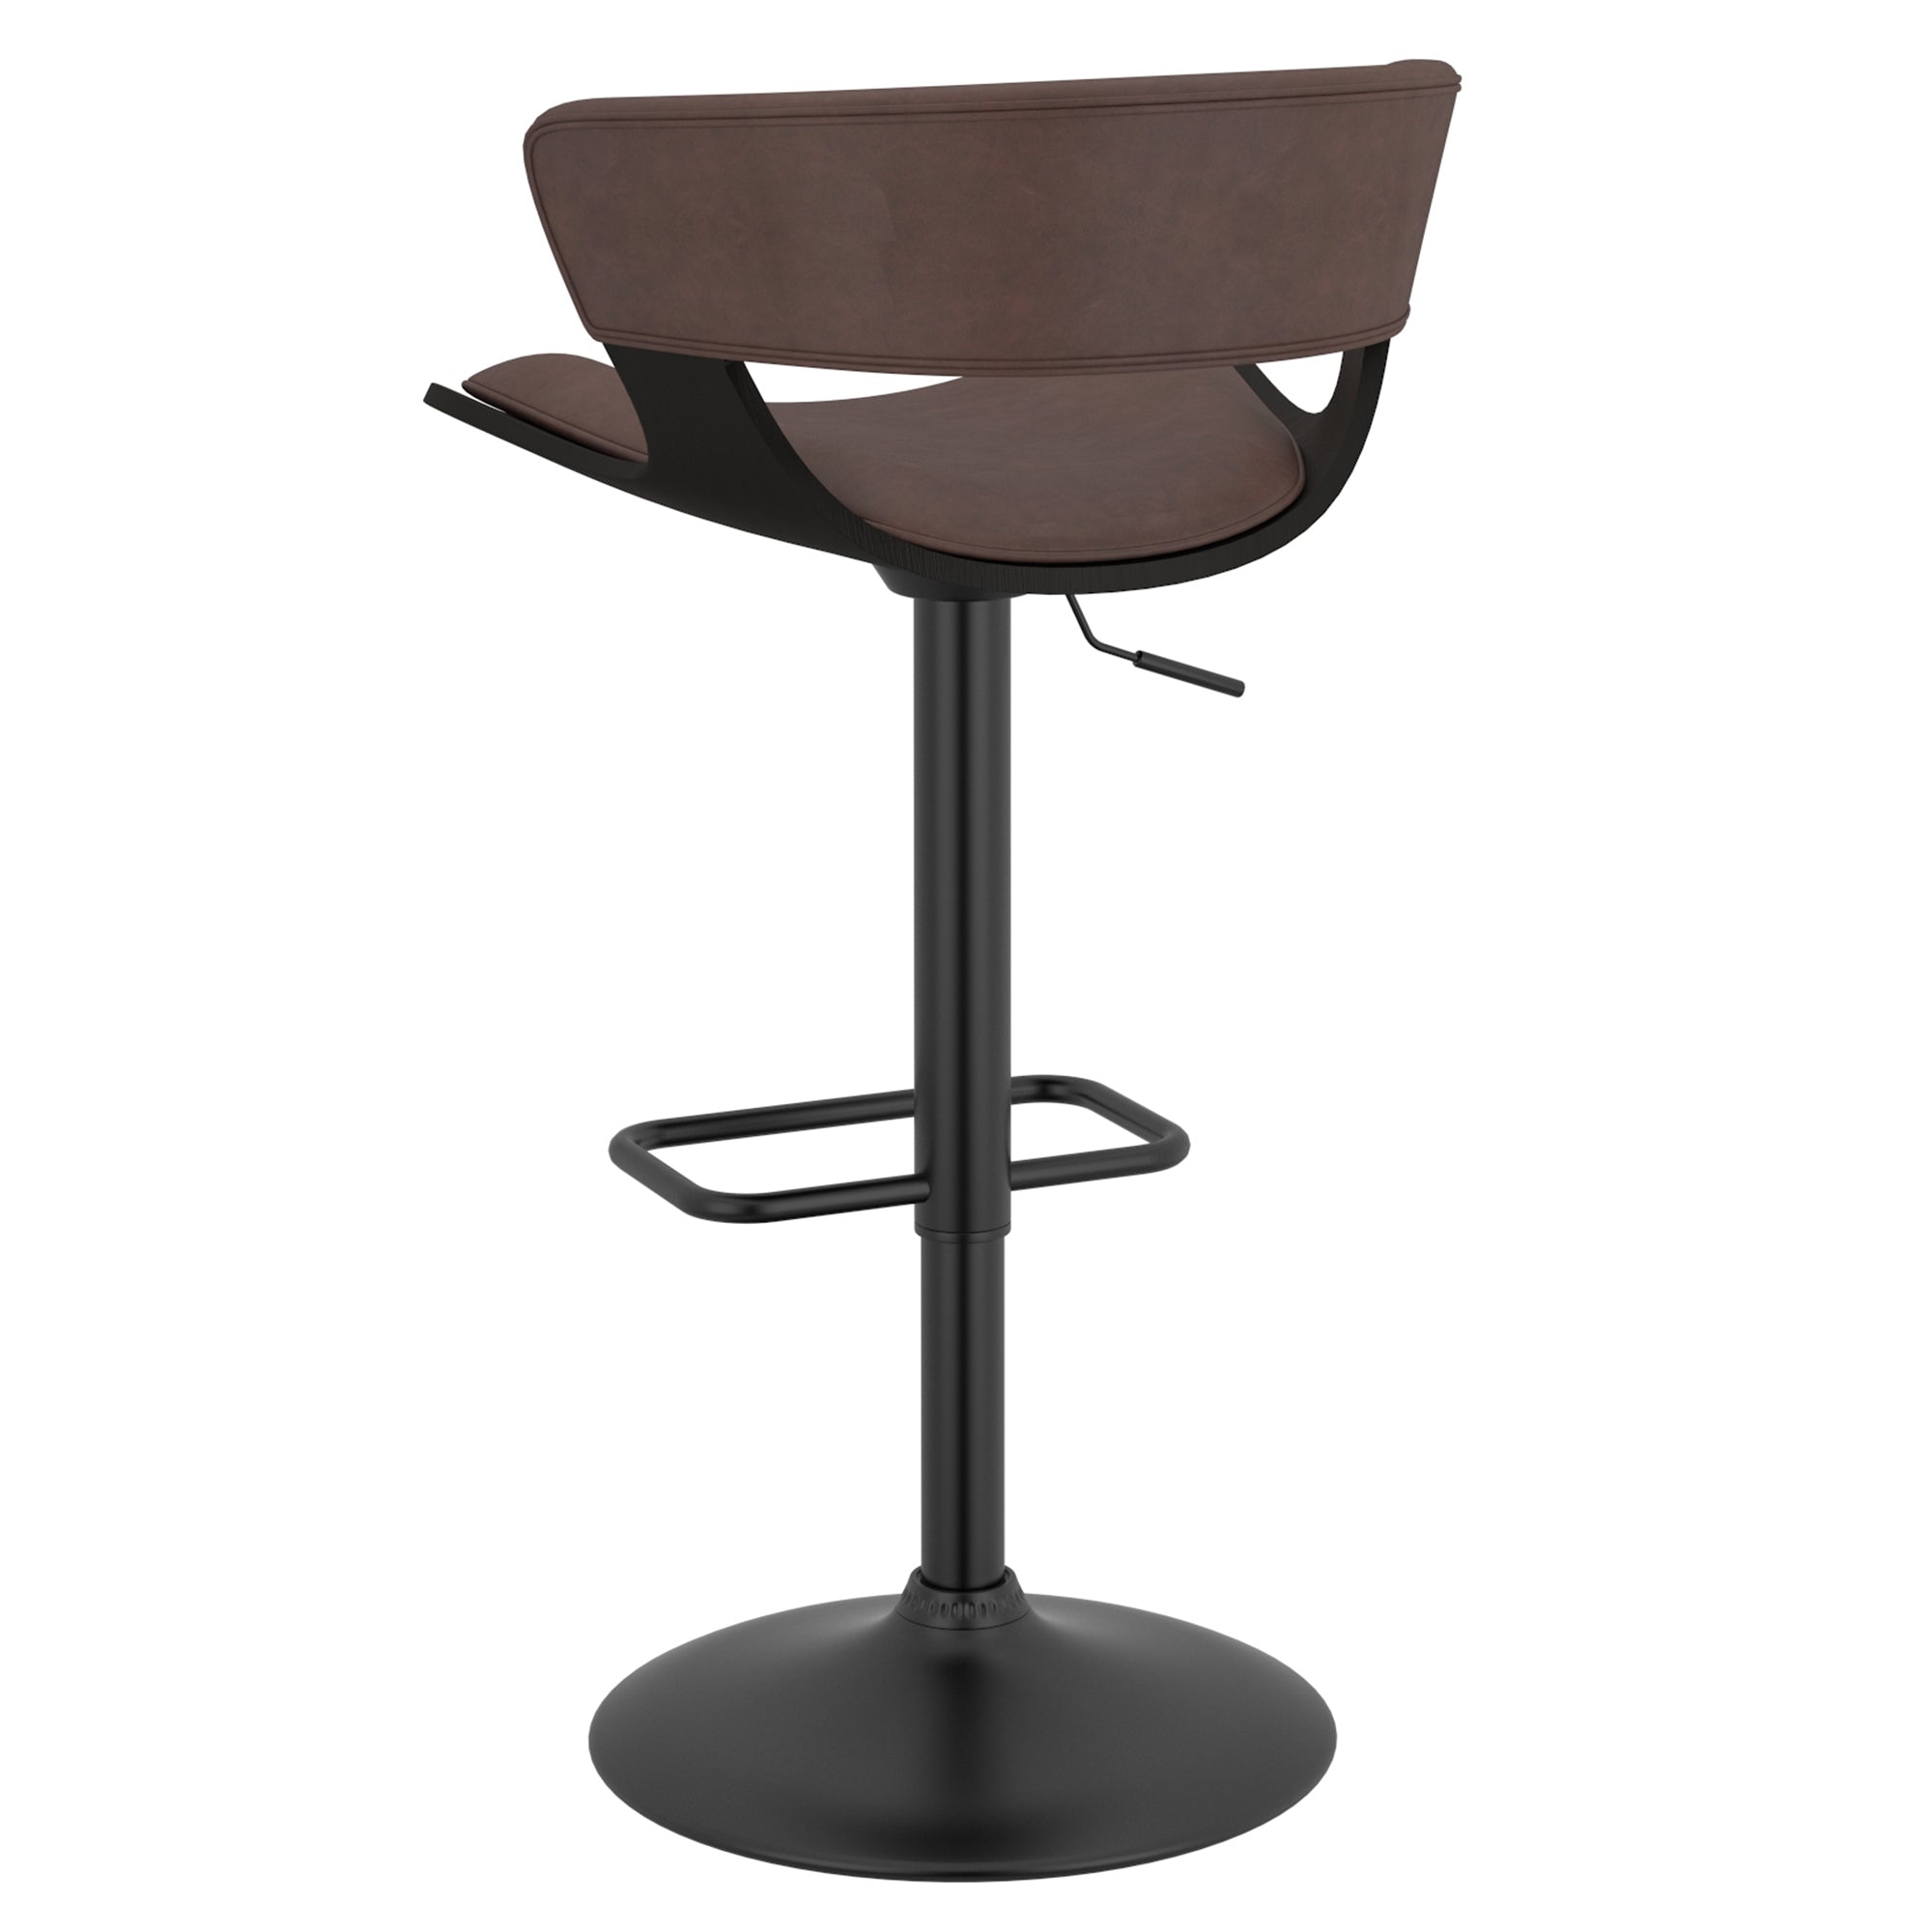 Rover Adjustable Air Lift Stool in Brown and Black 203-554BN